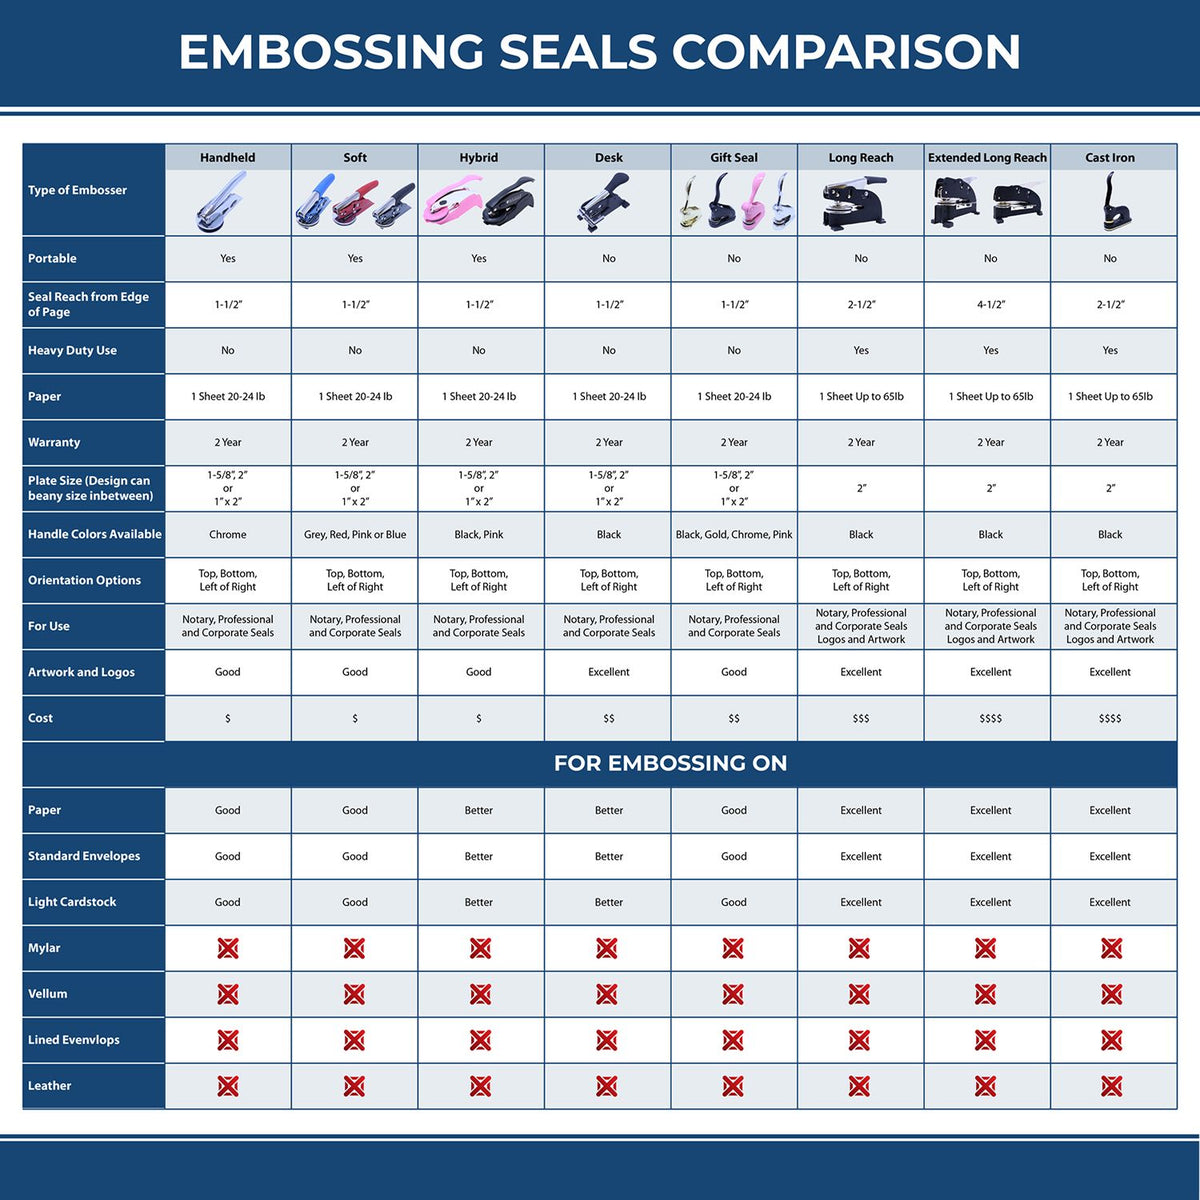 A comparison chart for the different types of mount models available for the Gift Michigan Engineer Seal